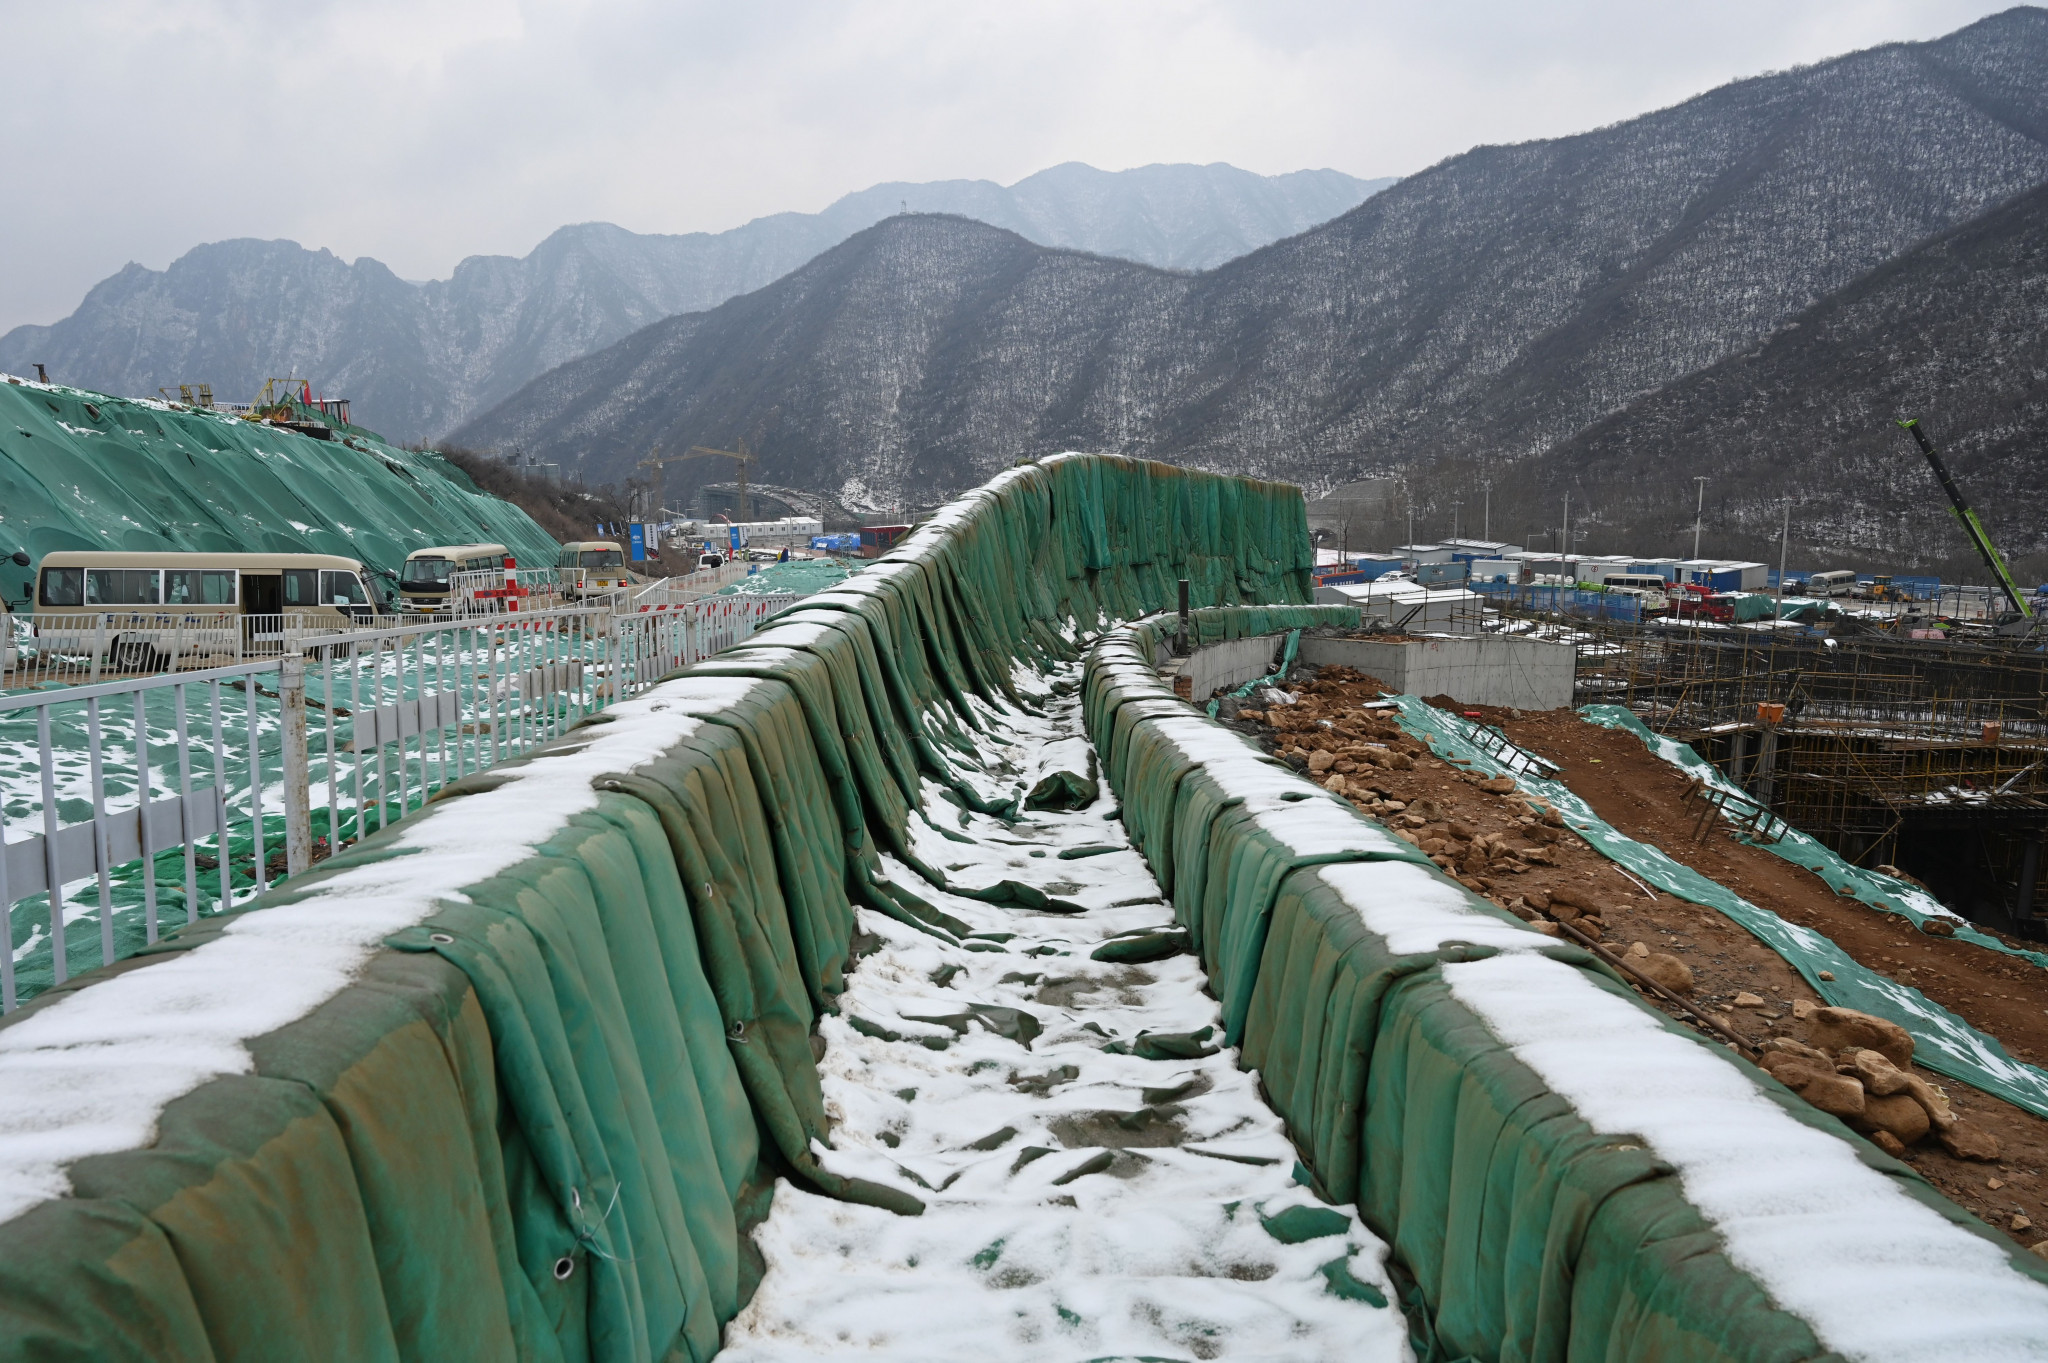 A sliding centre is being constructed ahead of the 2022 Winter Olympics in Beijing ©Getty Images